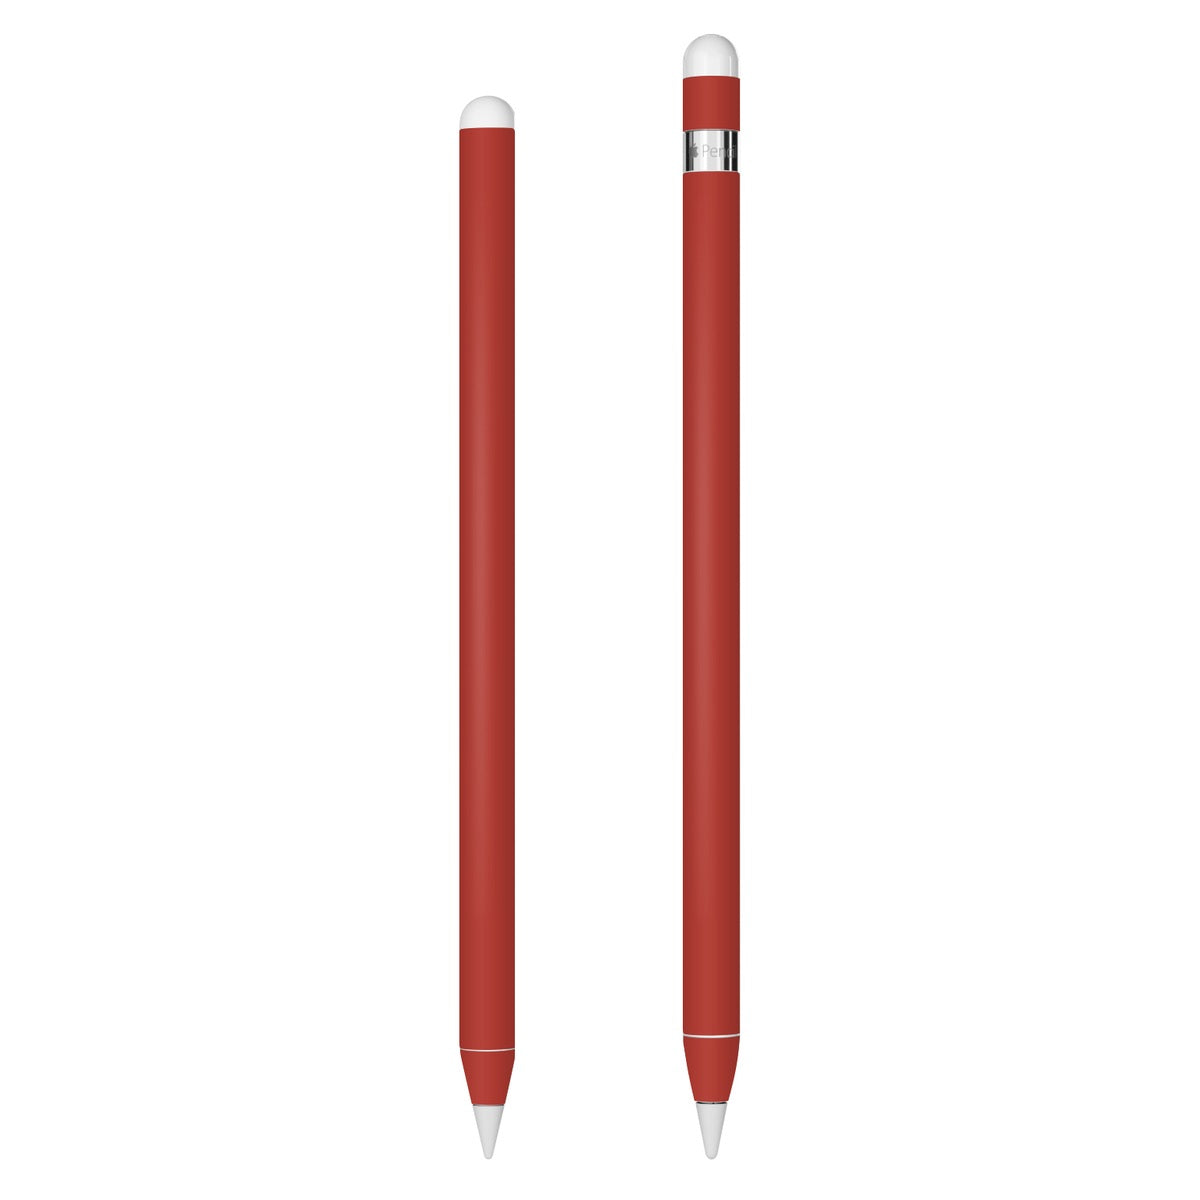 Solid State Berry - Apple Pencil Skin